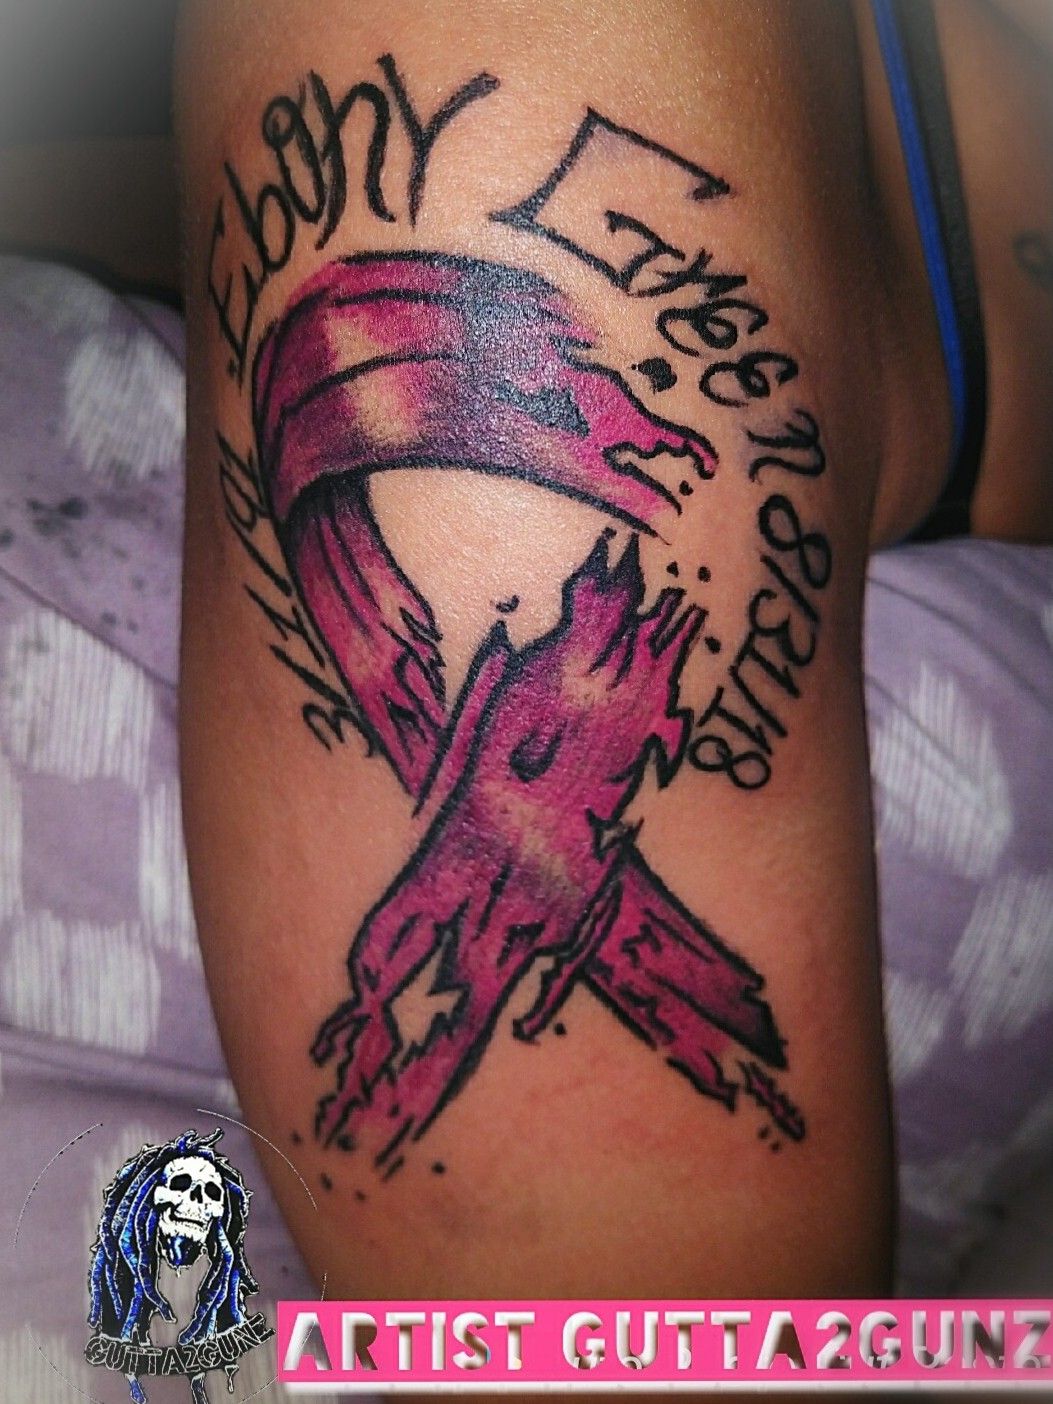 Breast Cancer Tattoos That Have Changed Lives and Help Save Them  Tattoo  Models